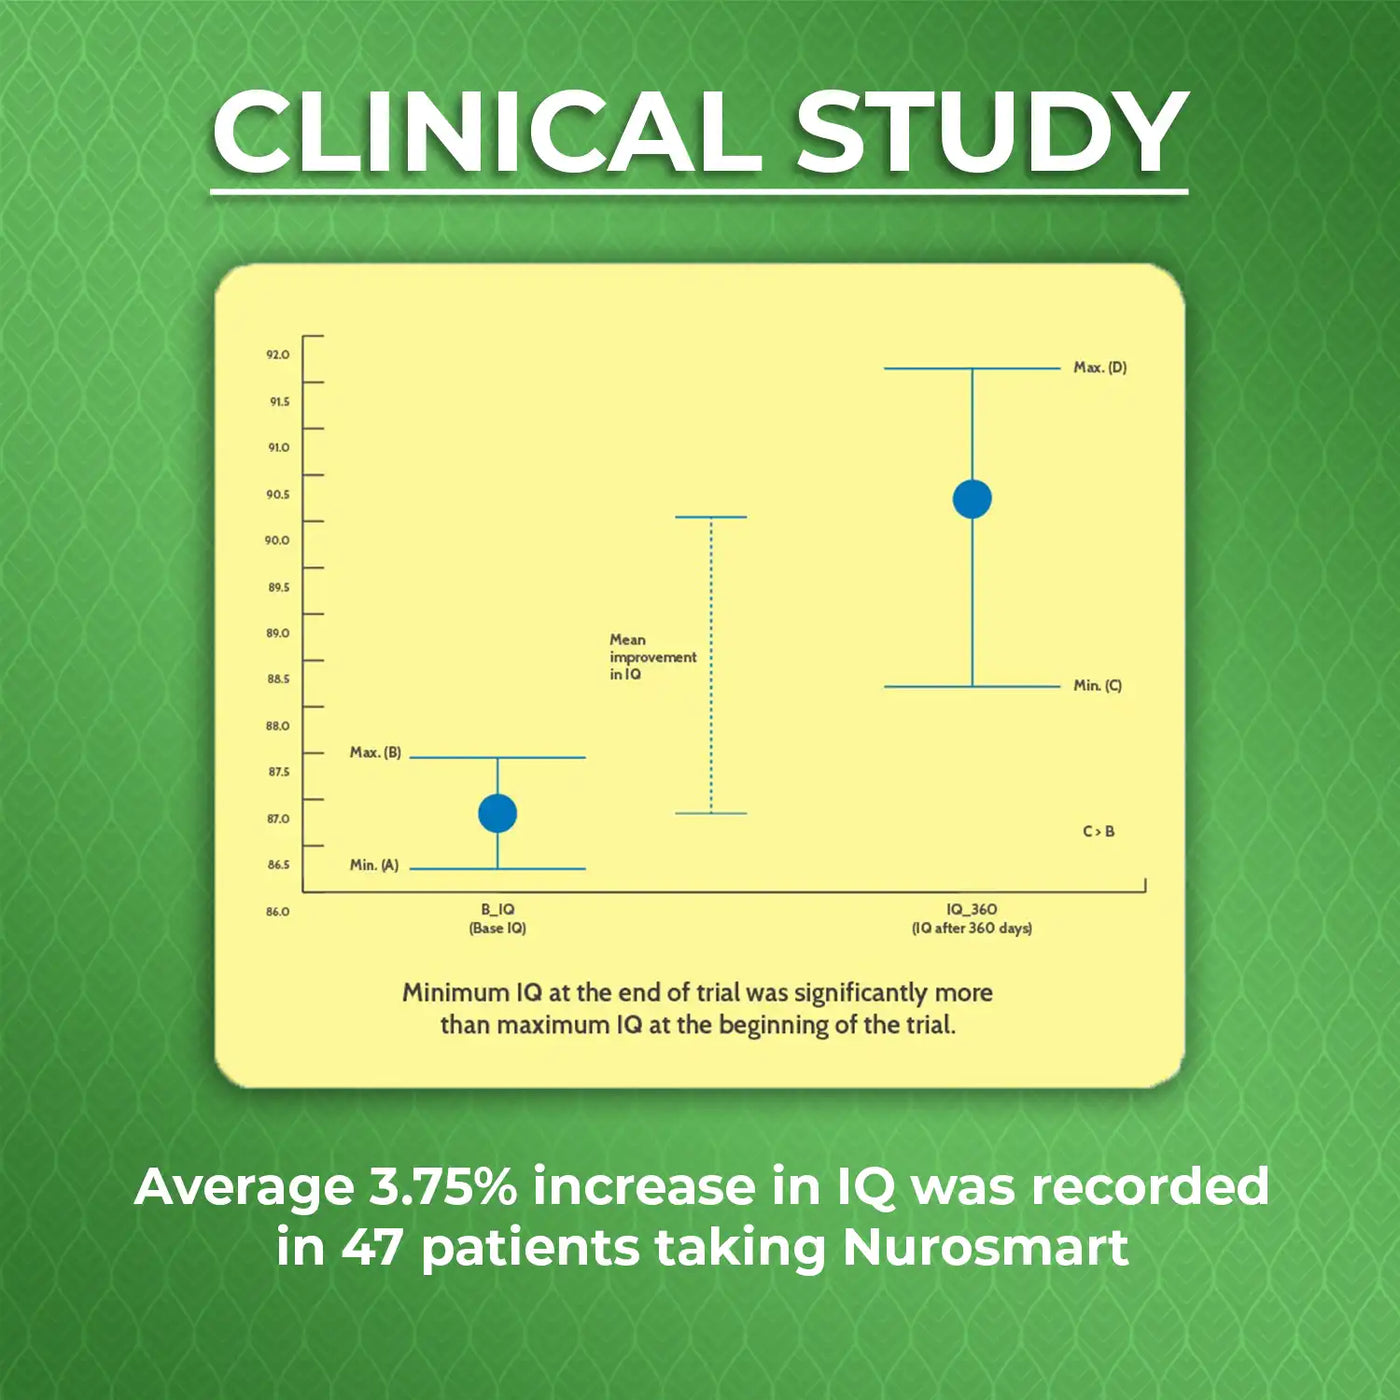 clinical study in humans on nurosmart capsule proving increase in IQ by 3.75% 